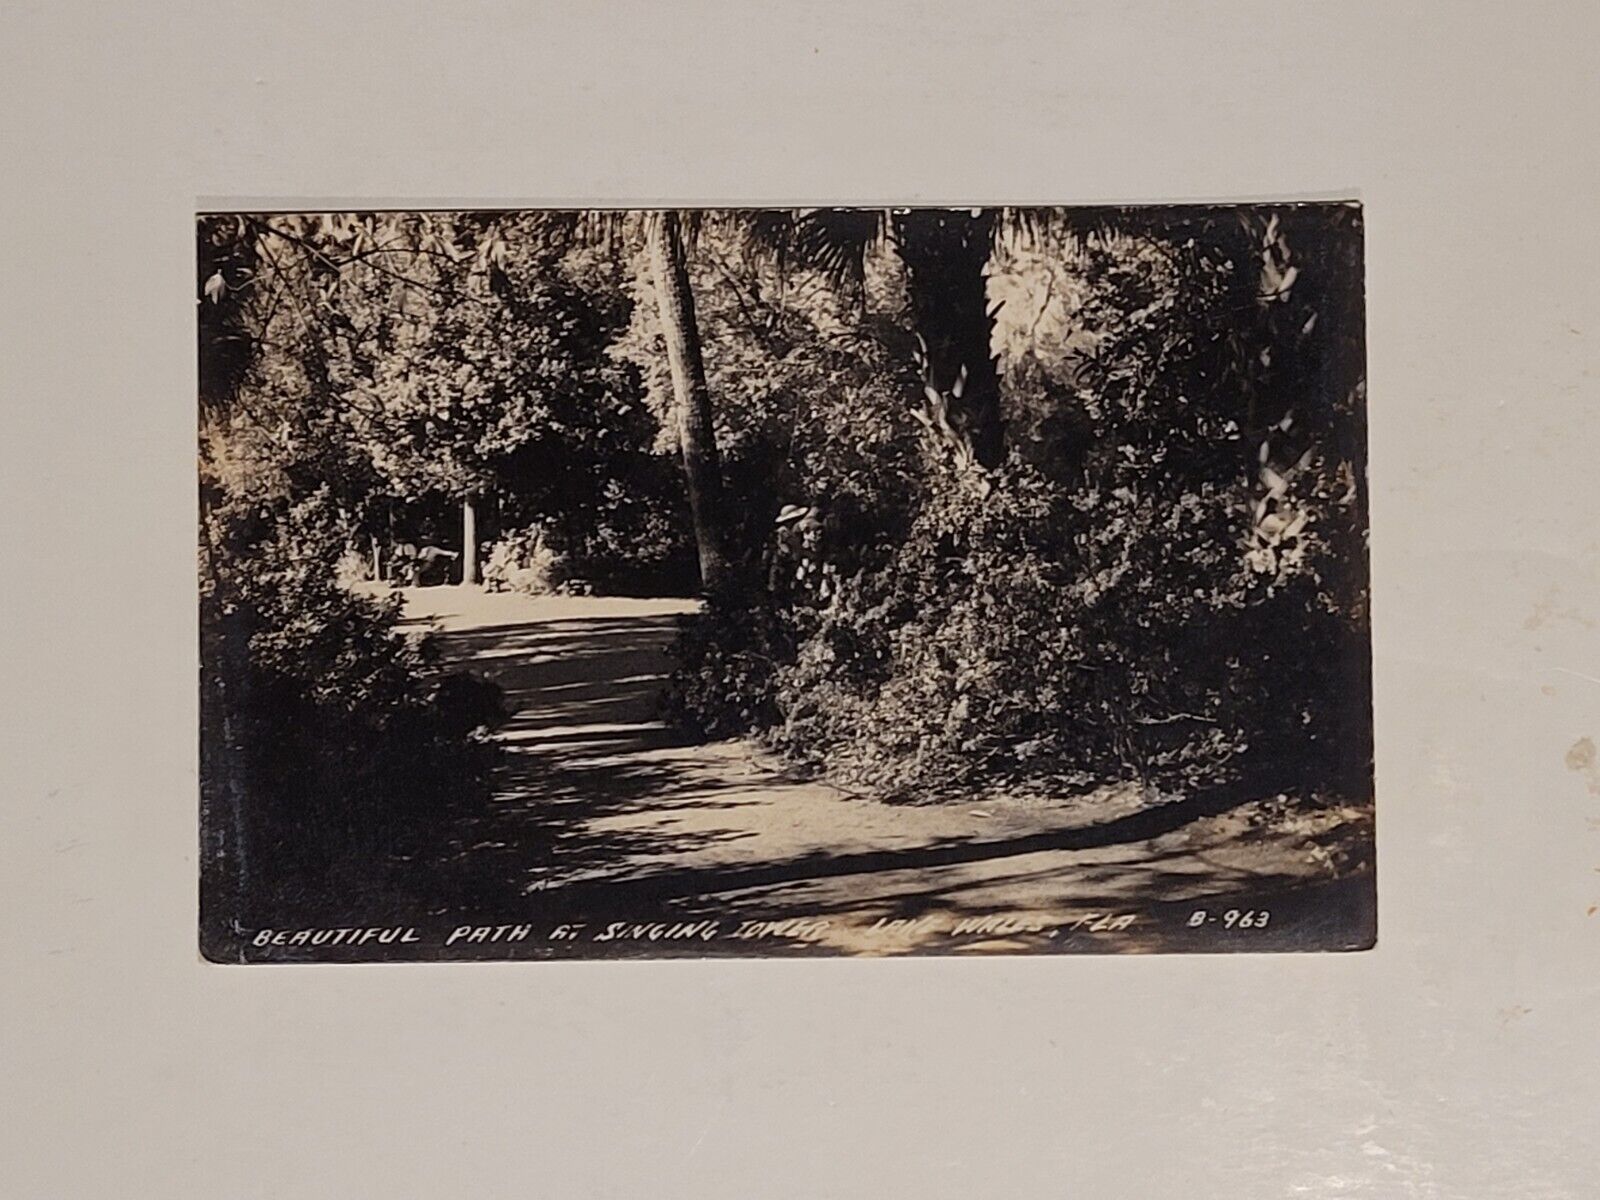 Forest Path Singing Tower RPPC Photo Postcard Lake Wales Florida L L Cook Artist